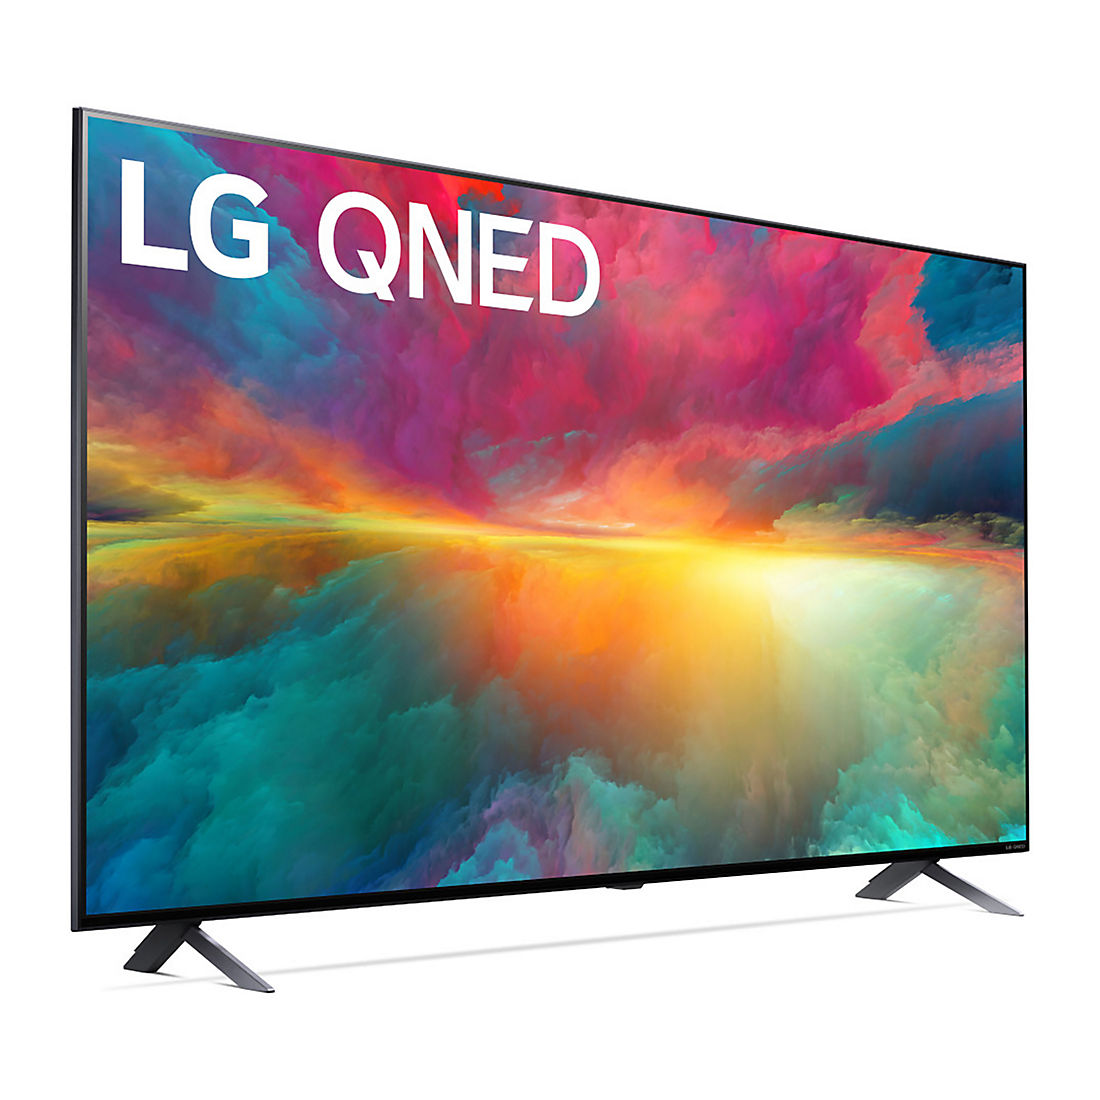 LG 65" UHD. LG QNED Mini led. QNED 50 LG. LG 75qned876qb. Lg телевизоры 65 qned